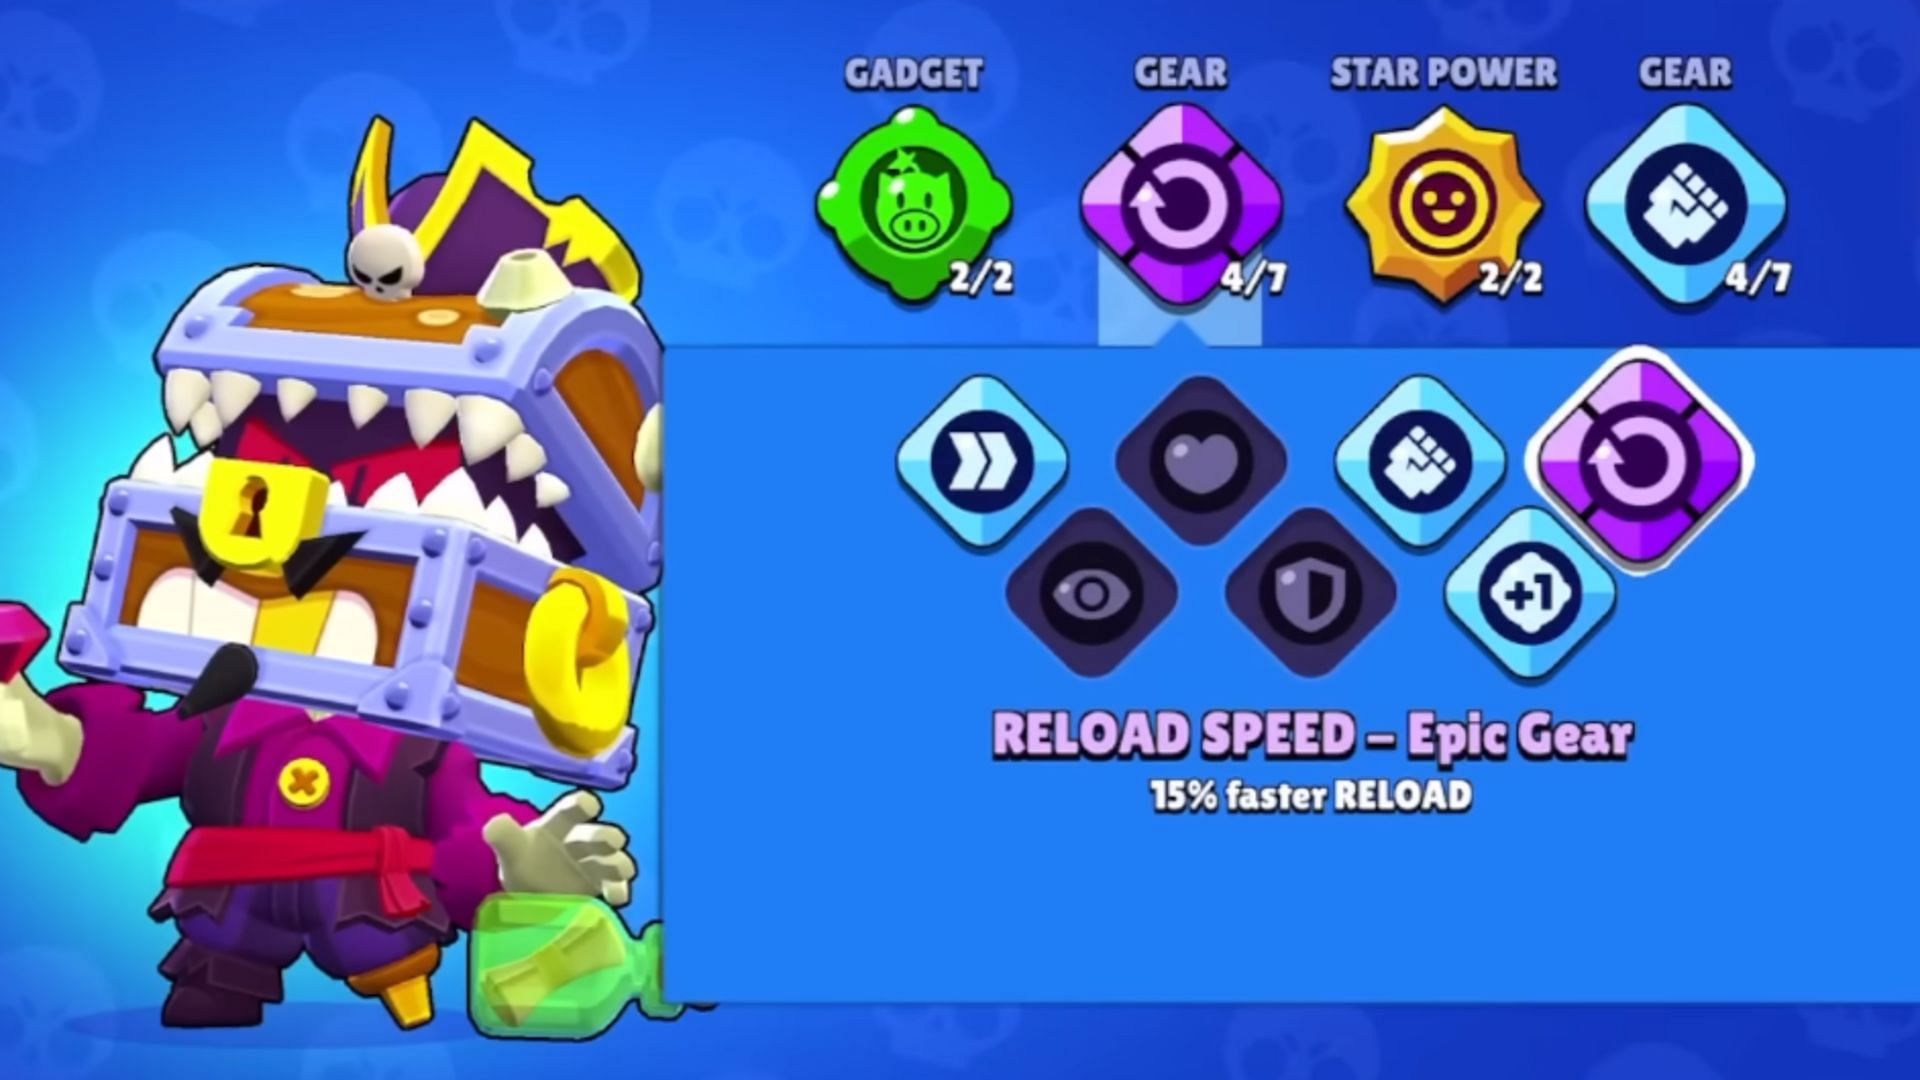 Reload Speed - Epic Gear (Image via Supercell)